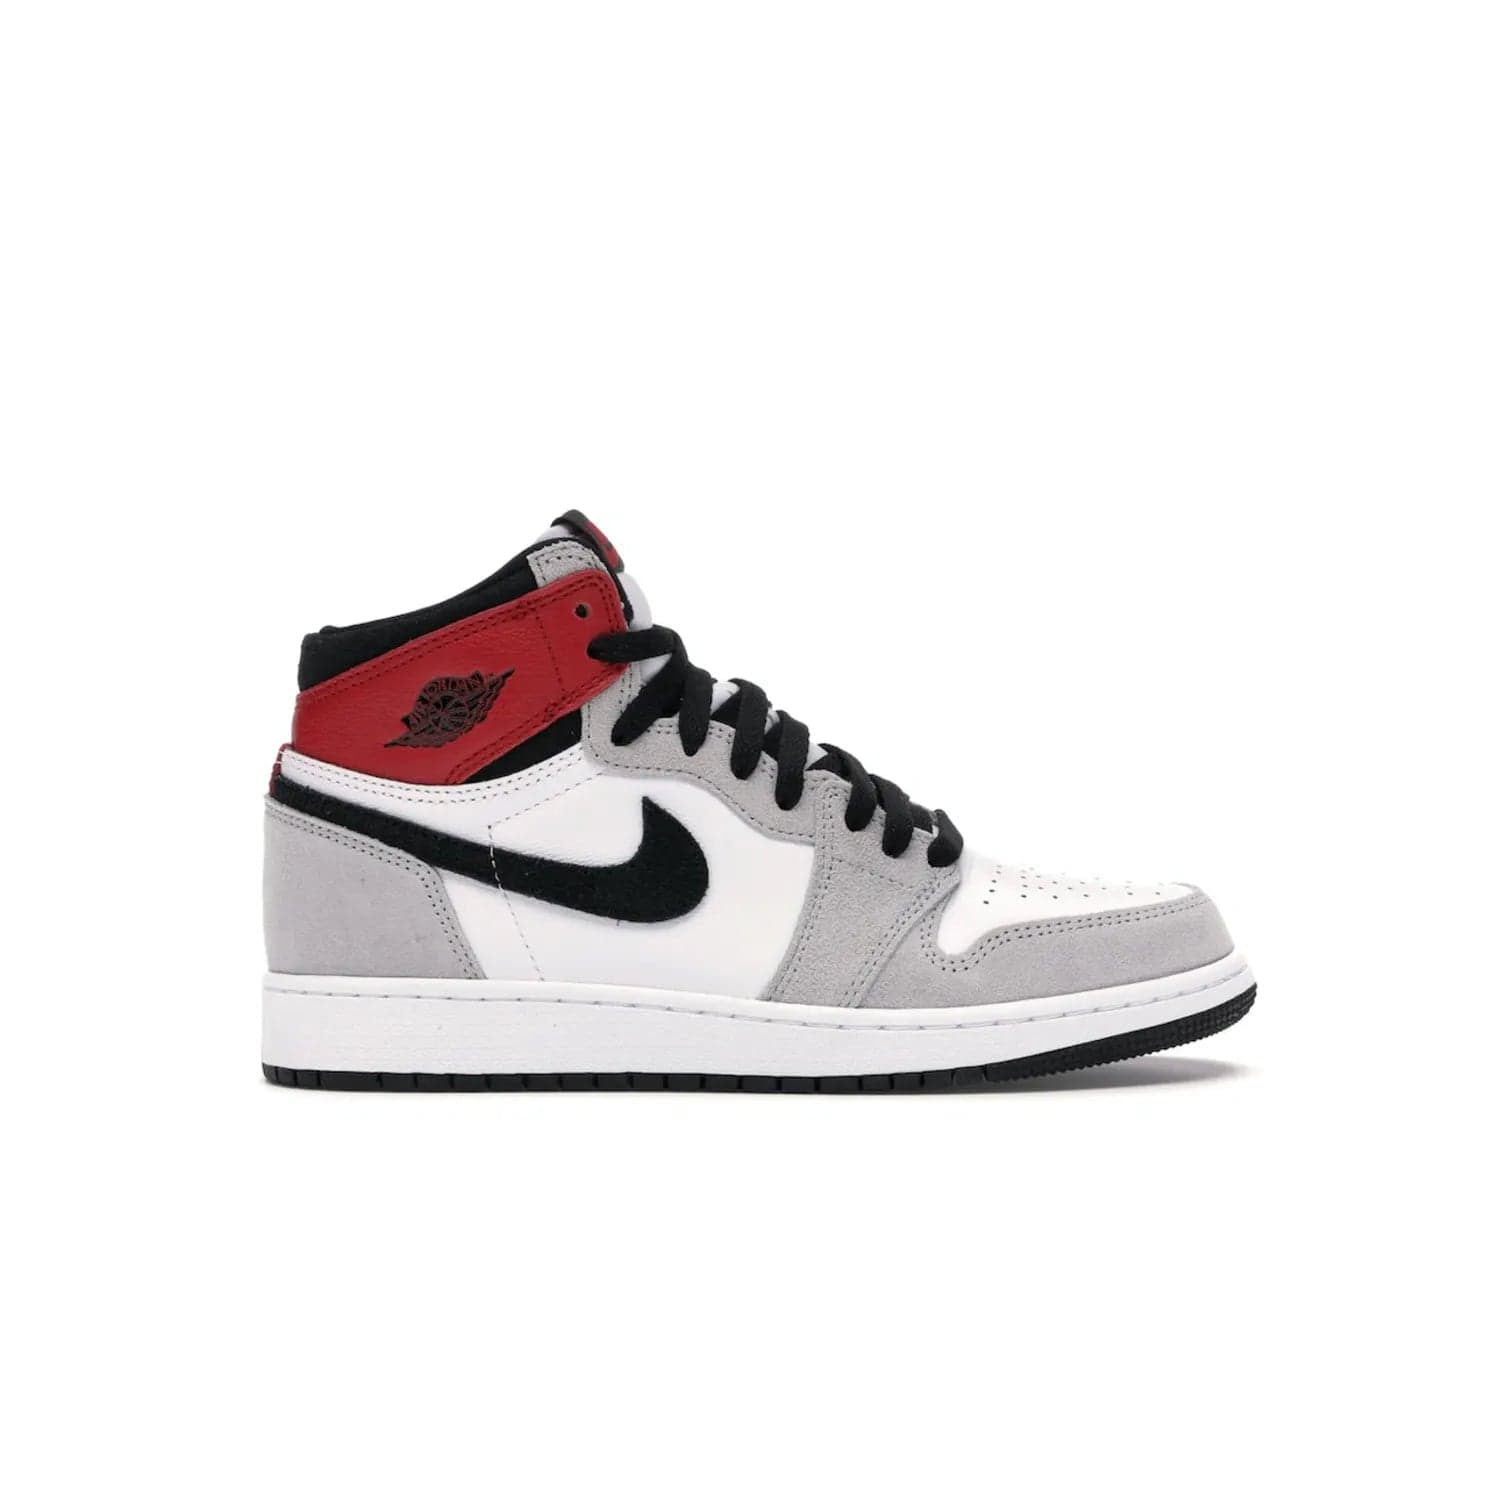 Jordan 1 Retro High Light Smoke Grey (GS) - Image 1 - Only at www.BallersClubKickz.com - Jordan 1 Retro High Light Smoke Grey (GS) features shades of grey, black, and Varsity Red with a bold silhouette. Premium white leather and suede overlays create a unique look. Released July 2020, offering style and performance. Perfect sneaker for any collector or fan.